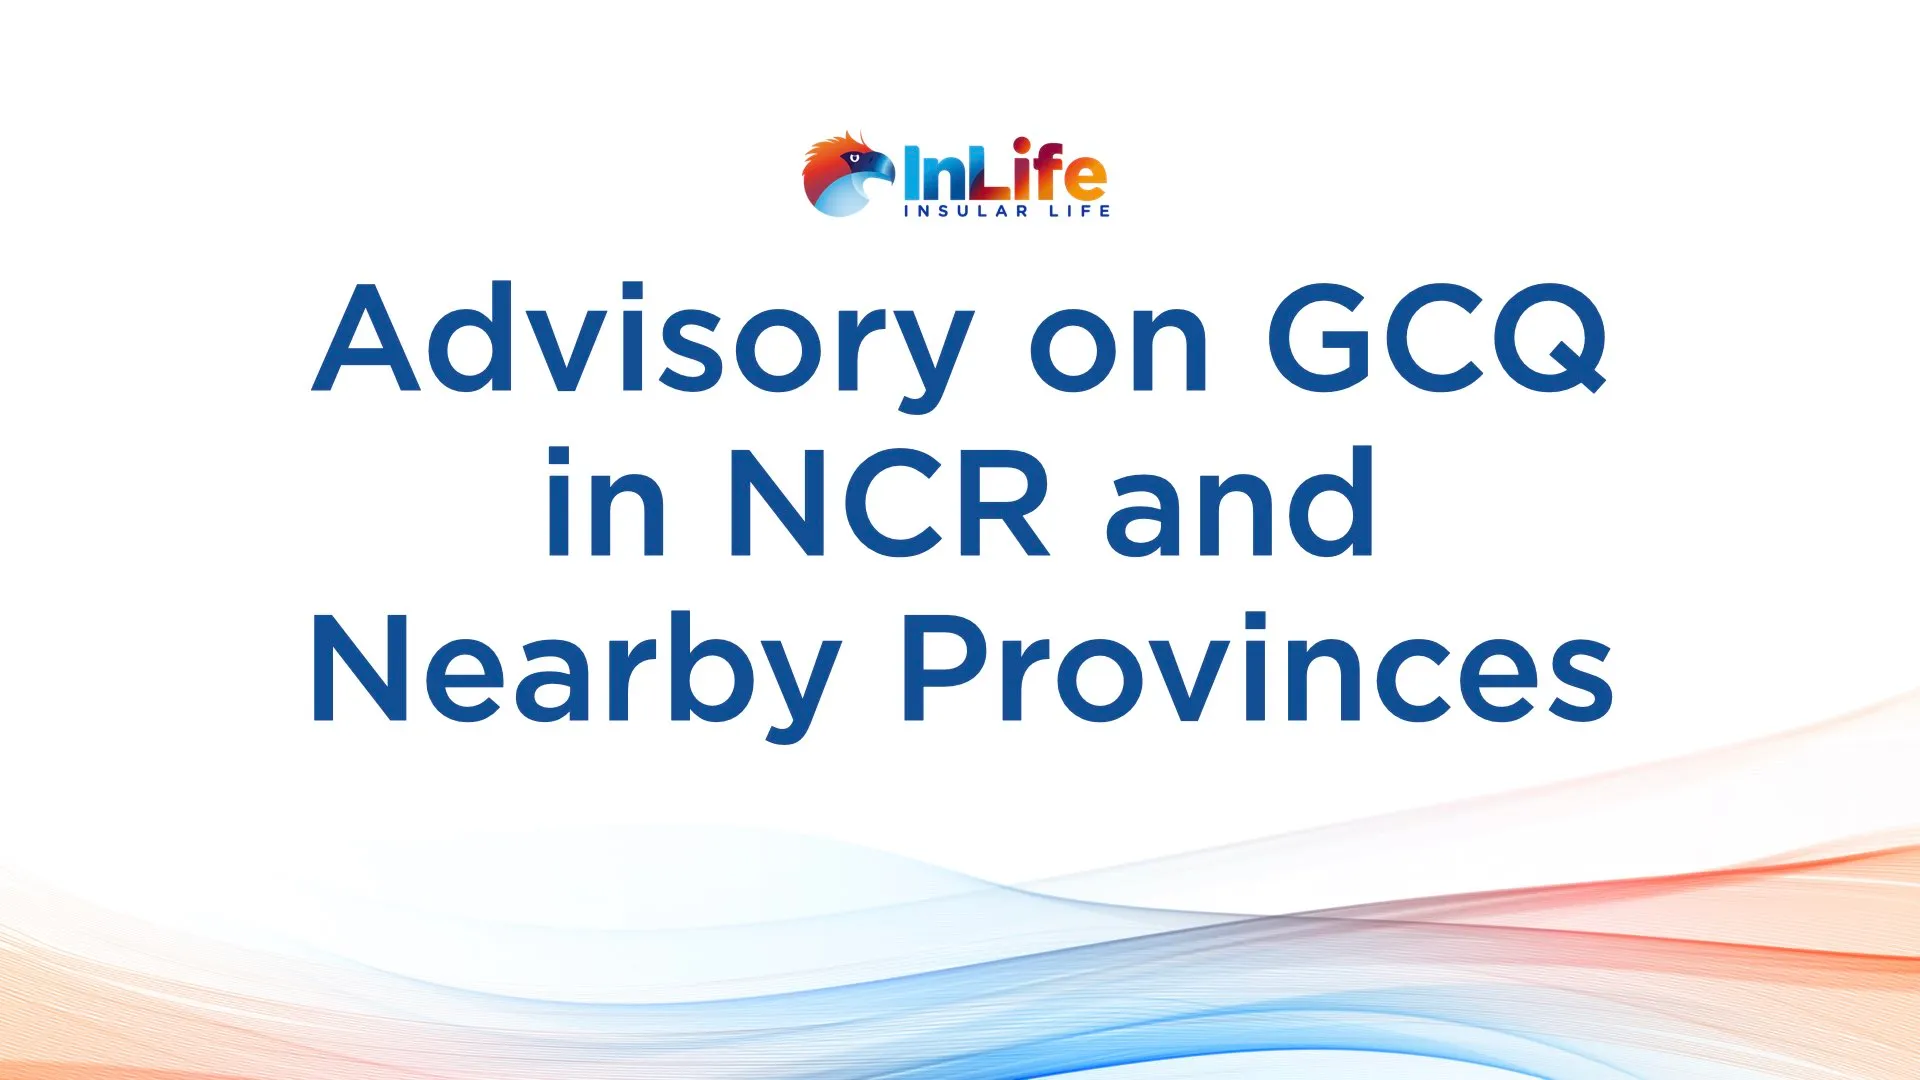 inlife-advisory-on-return-to-gcq-of-ncr-and-nearby-provinces